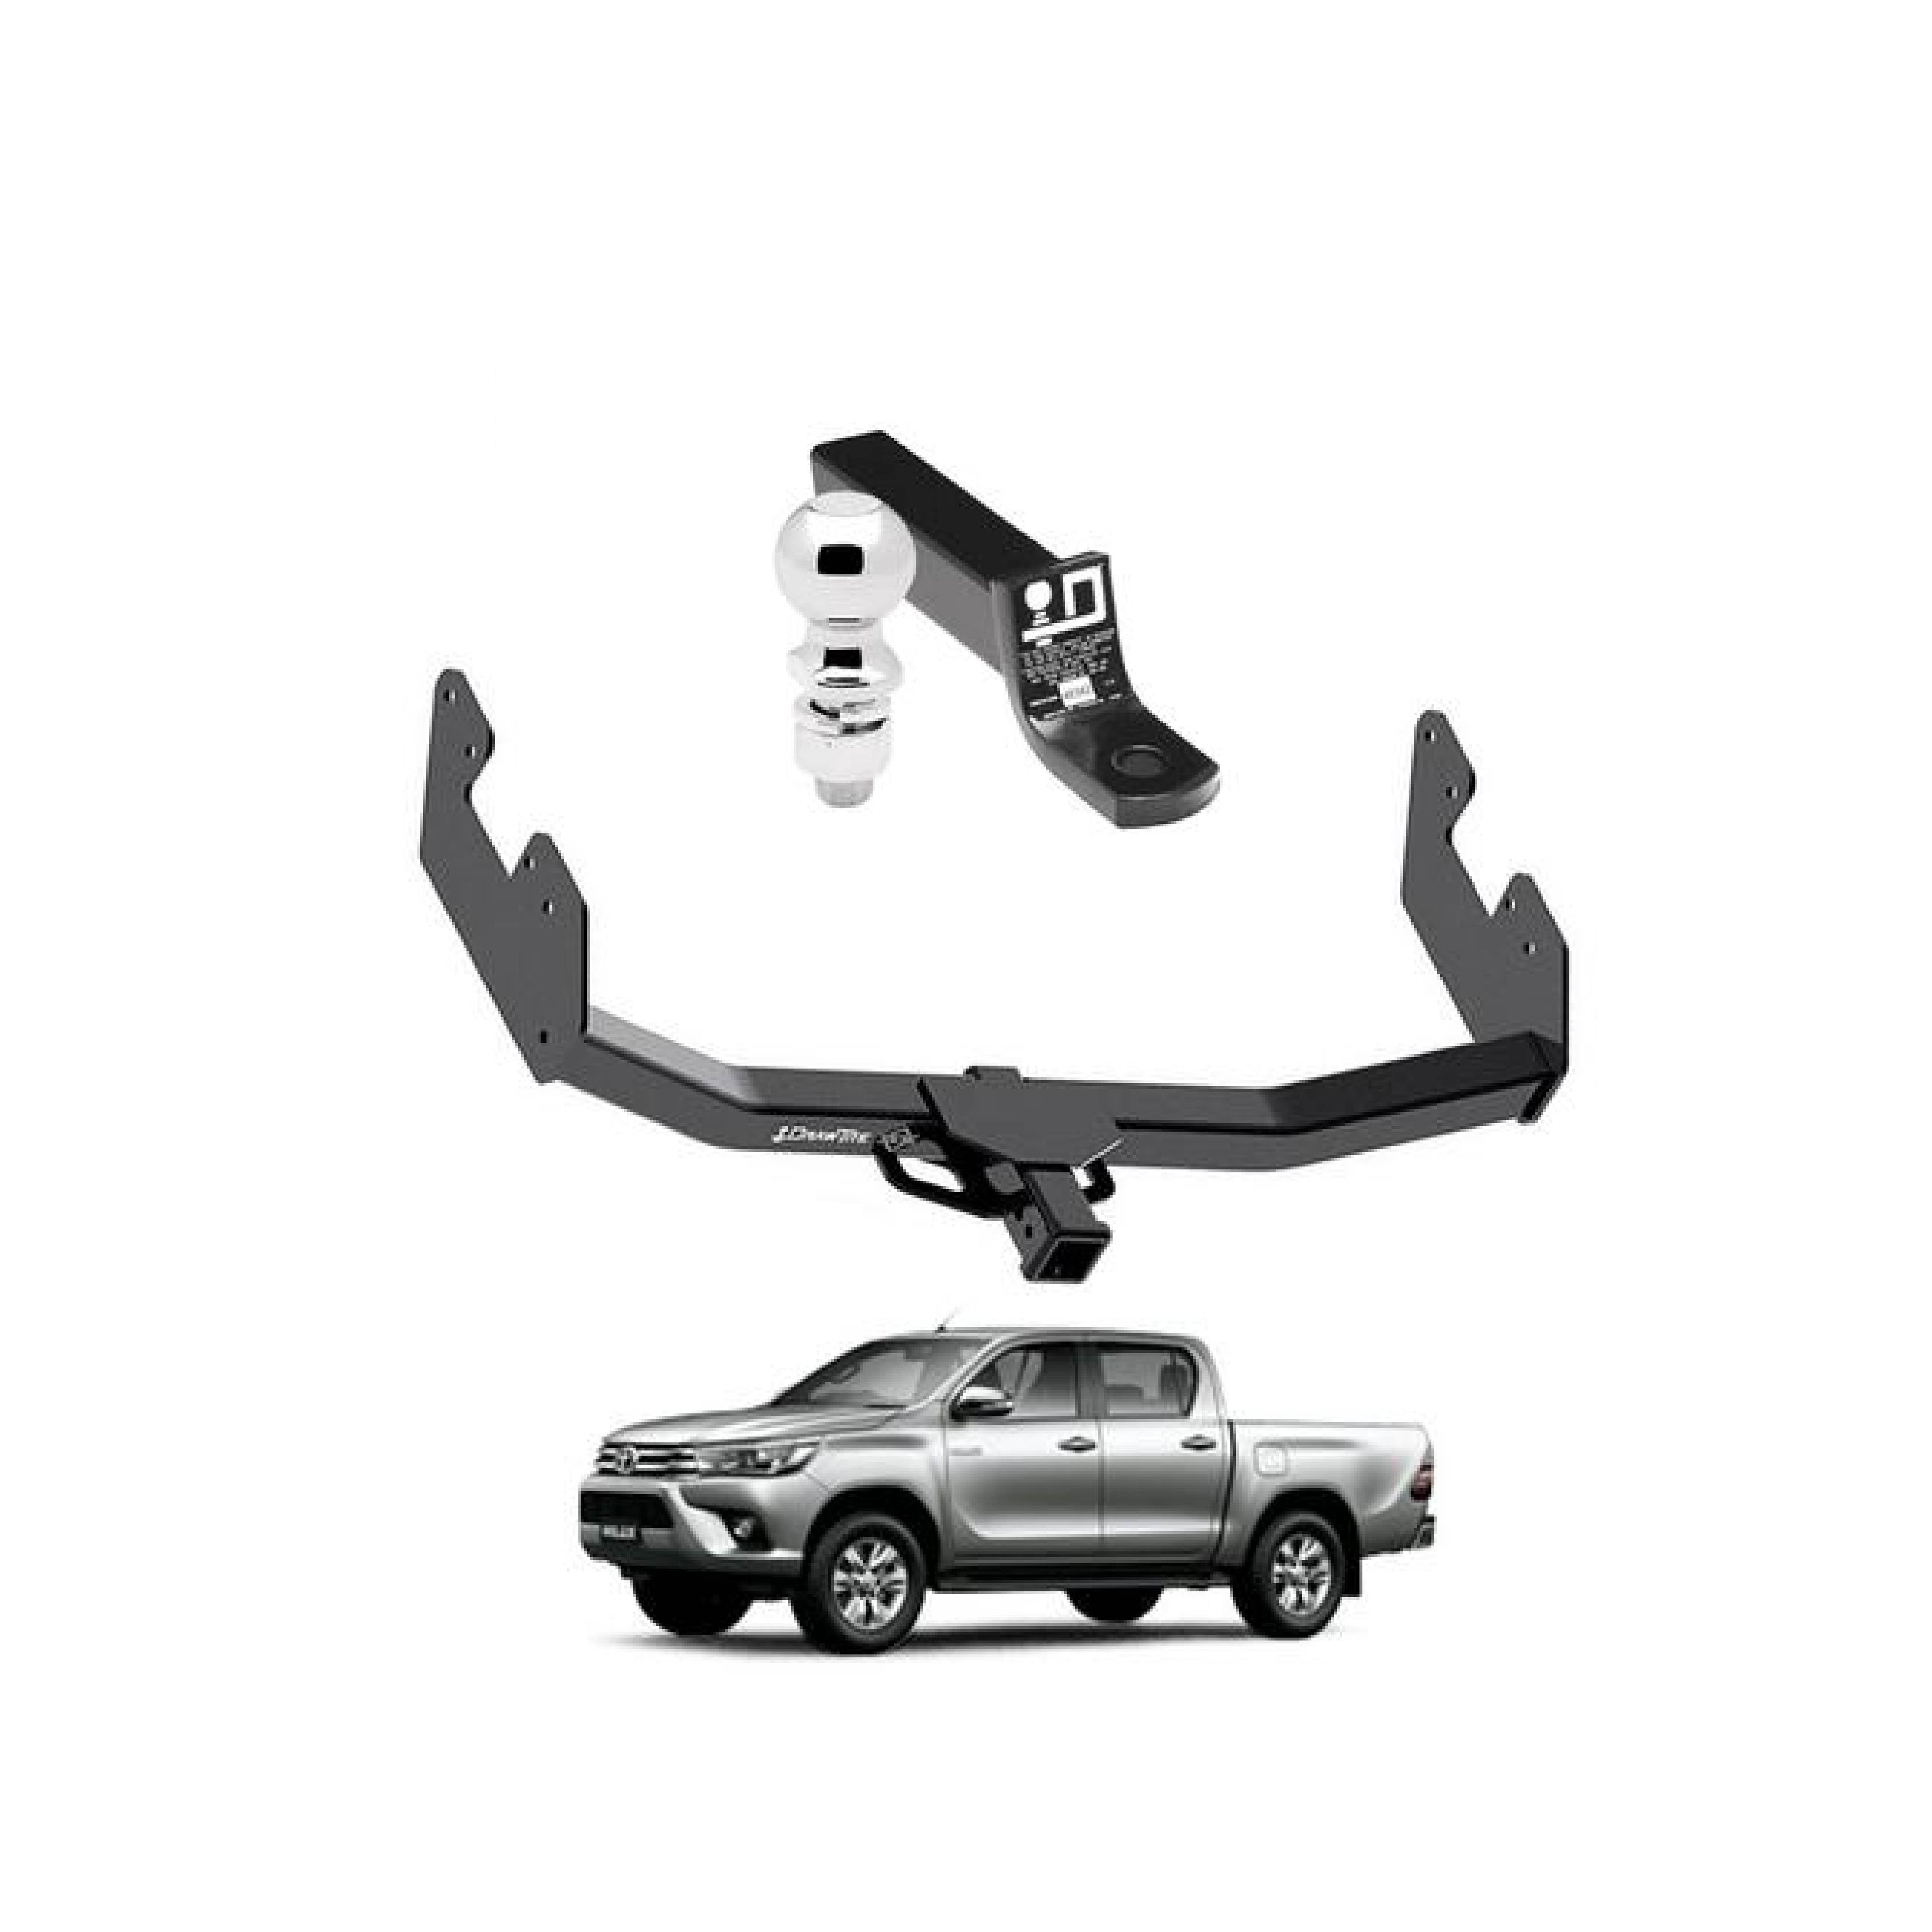 Draw Tite Towing Kit (Frame Receiver + Ball Mount) for 2016-2019 Toyota Hilux